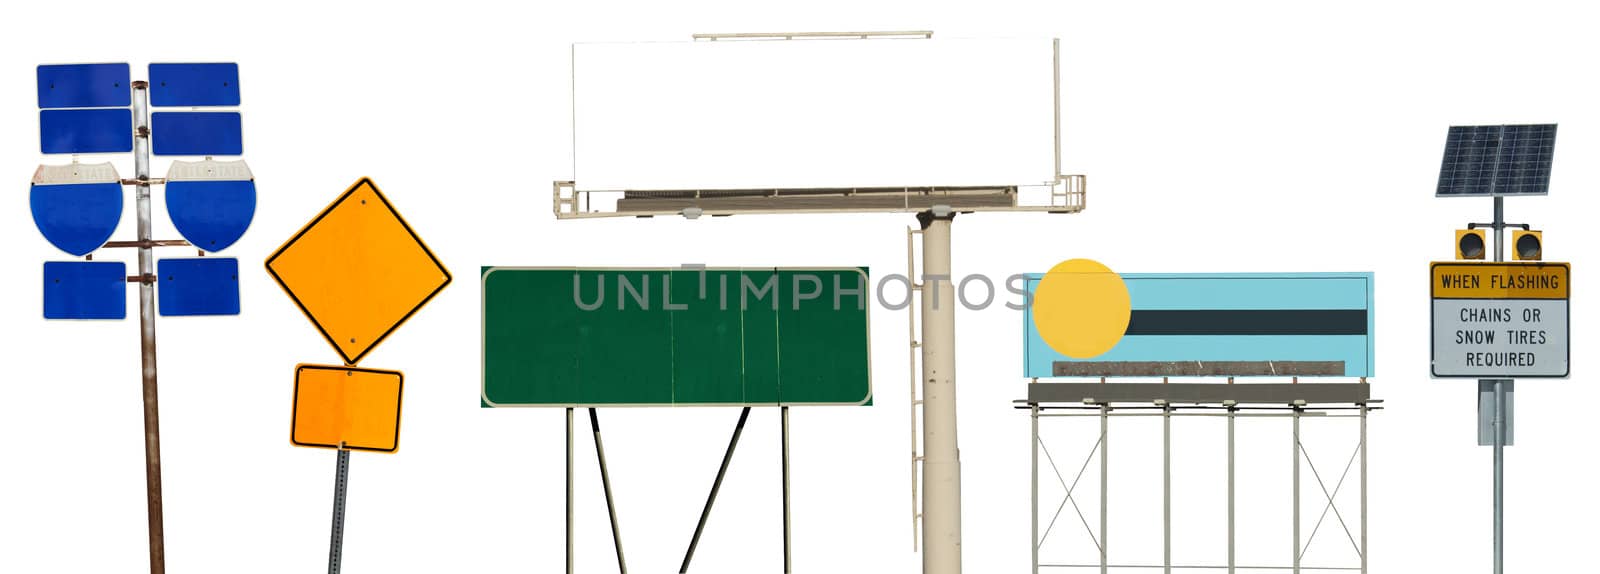 Multiple road signs and billboards by jeremywhat